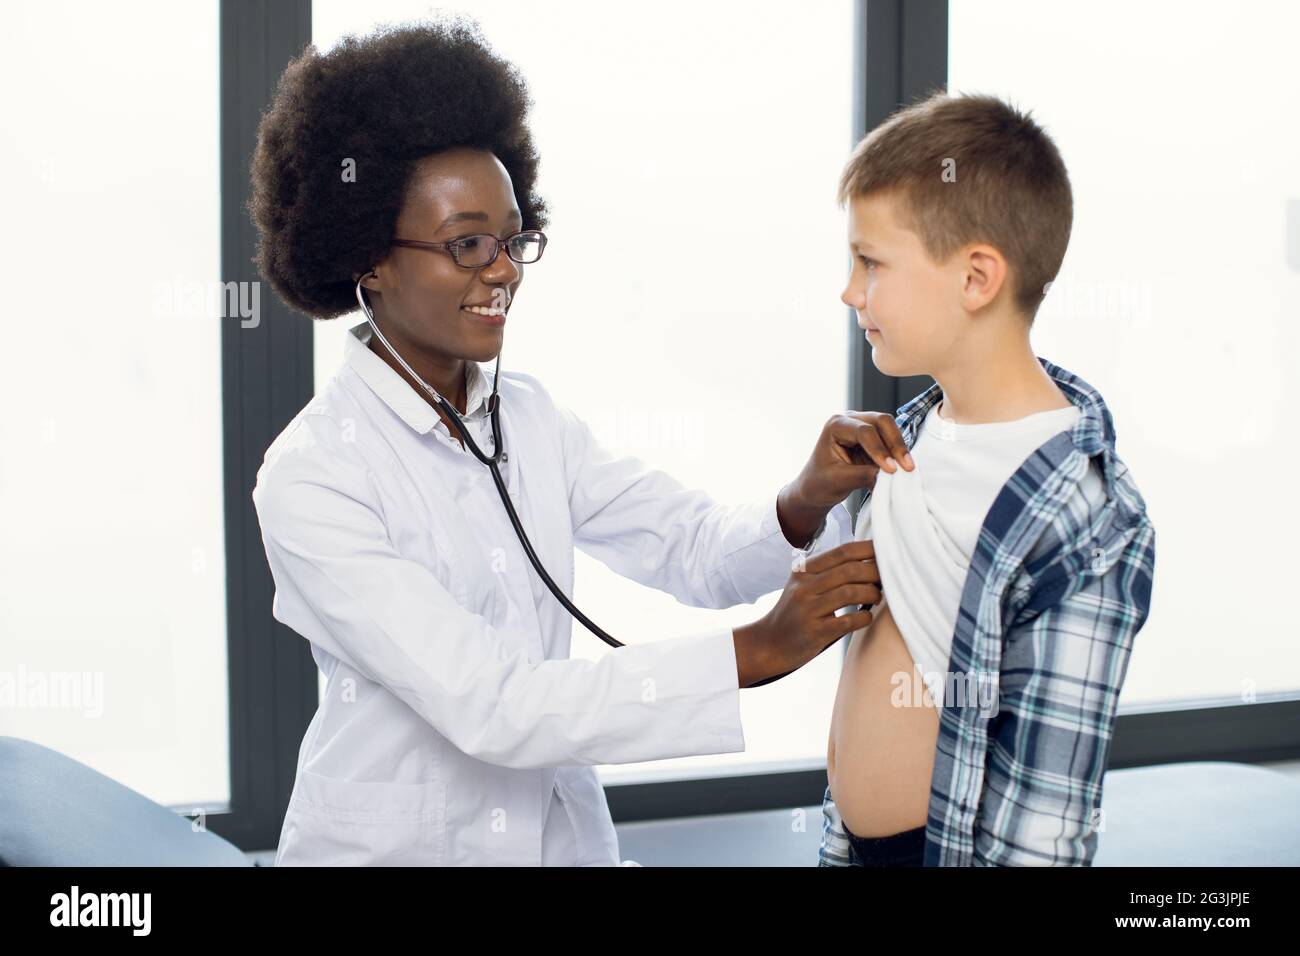 Cute likable Caucasian teen boy and joyful African woman doctor, during doctors checkup. Pediatrist examinates young patient's heartbeat and lungs with stethoscope Stock Photo